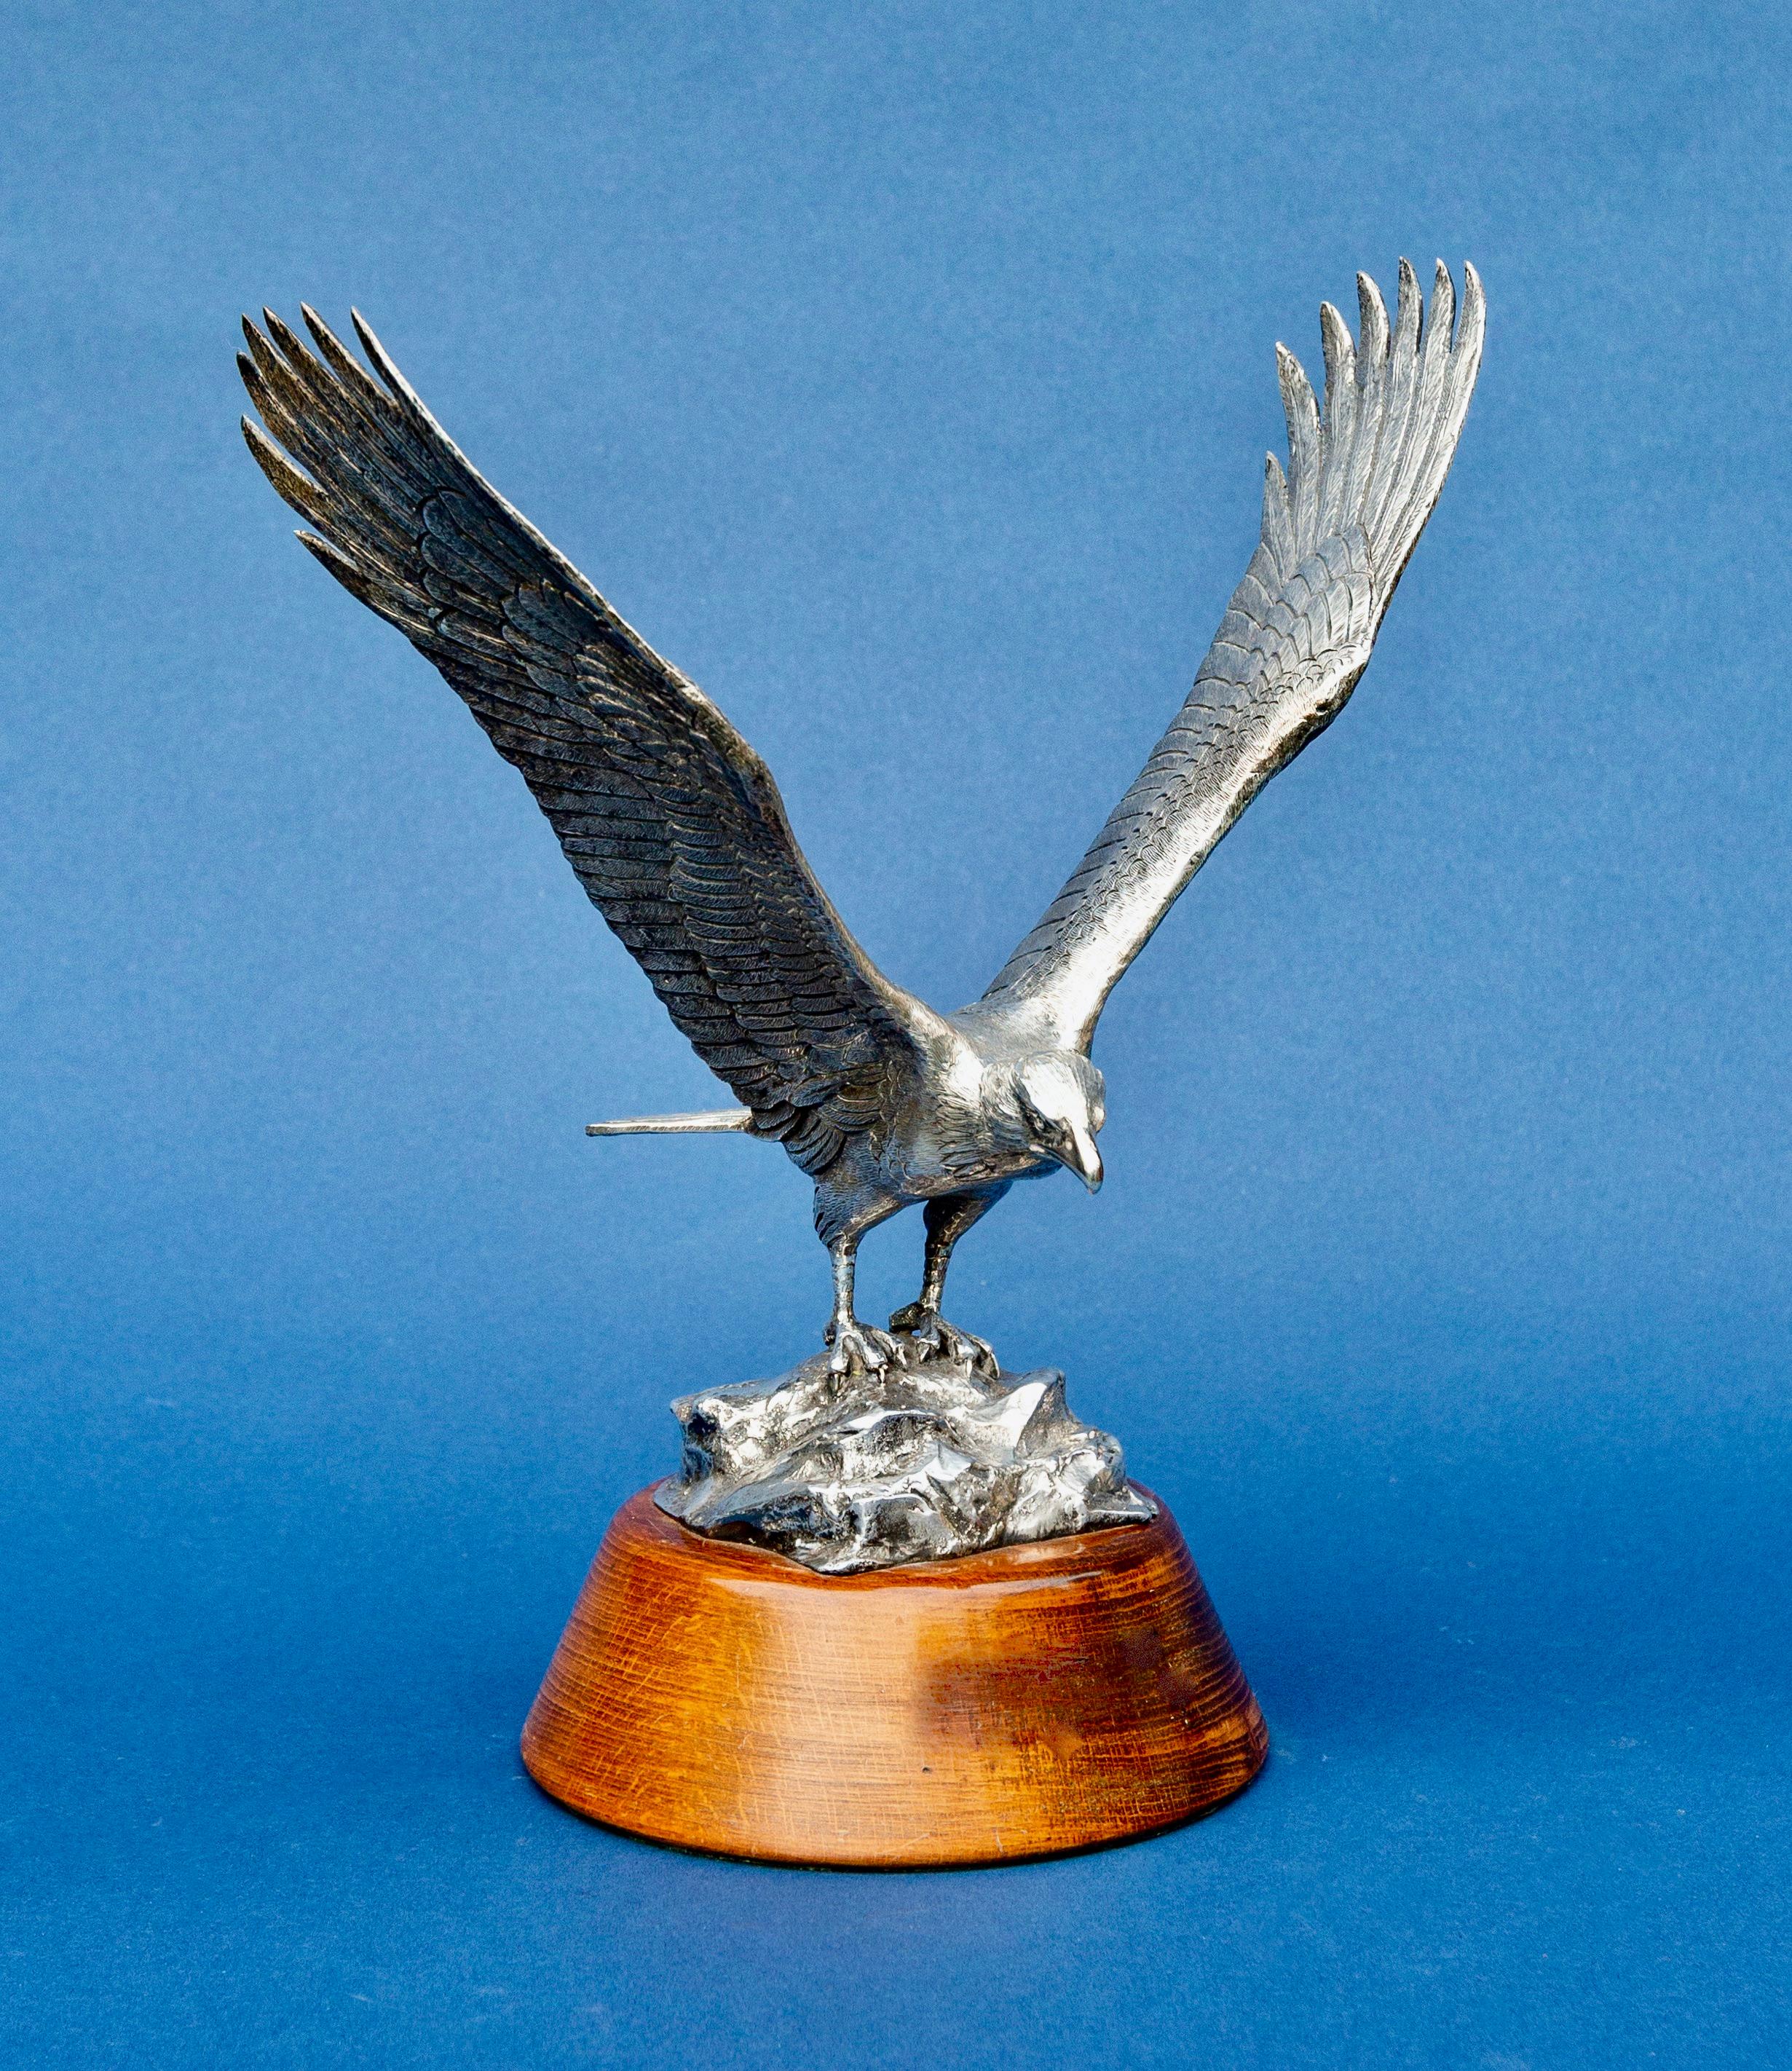 Solid silver model of an eagle, with outstretched wings and realistically chased plumage, by Barnard Bothers, London, 1971.